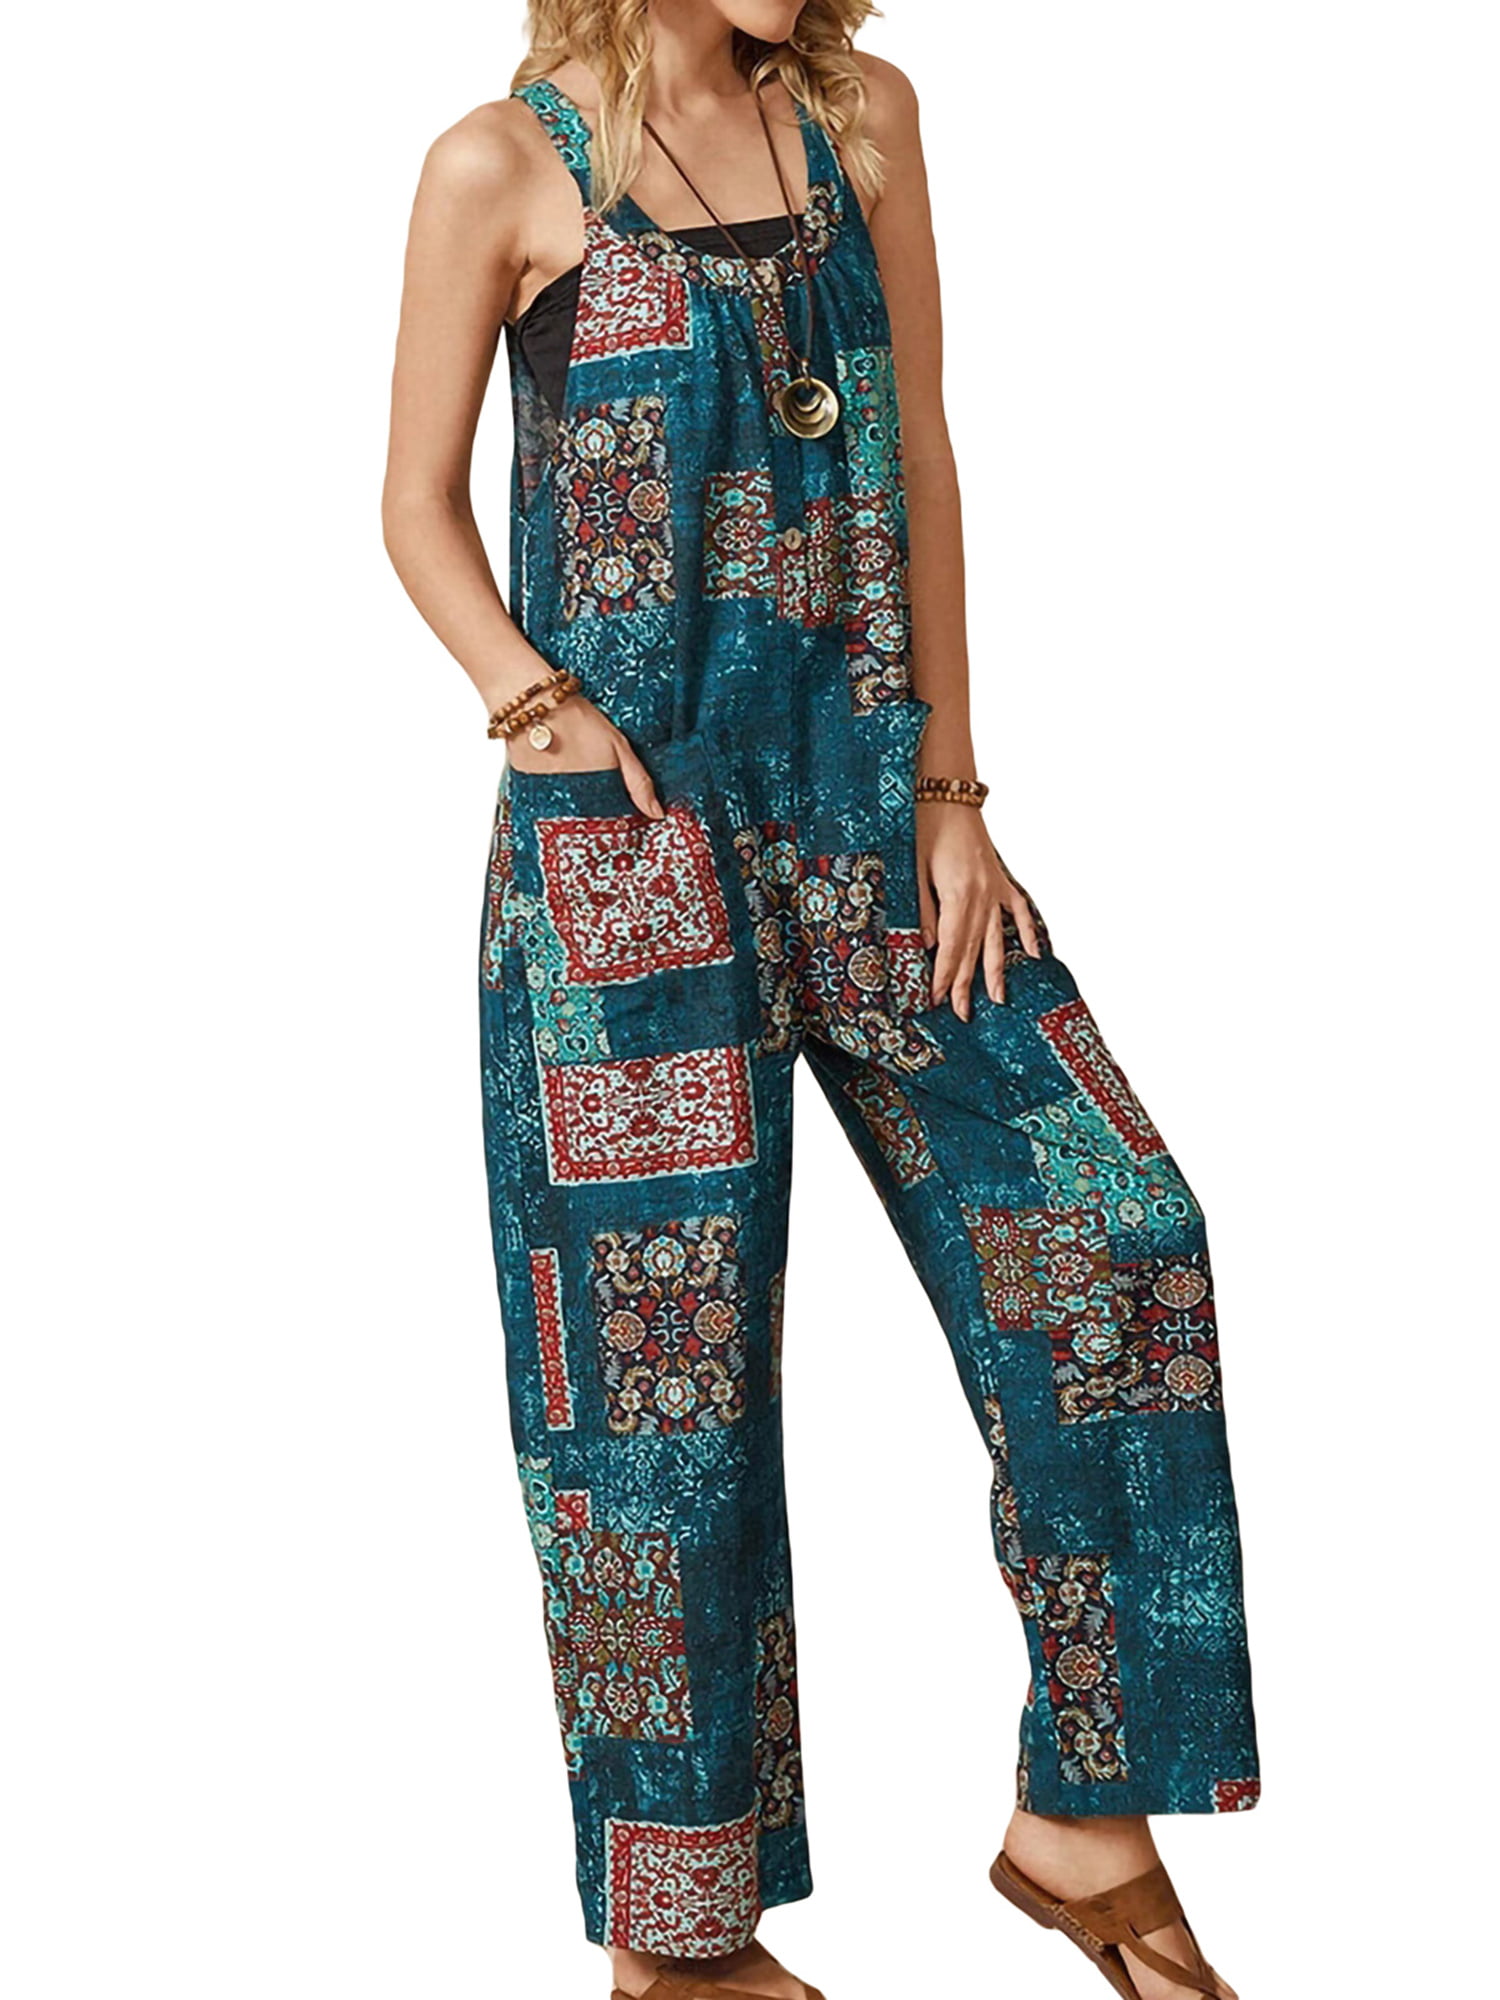 Women Boho Overall Playsuit Suspender Trousers Jumpsuit Sleeveless Baggy Dungarees with Pockets 